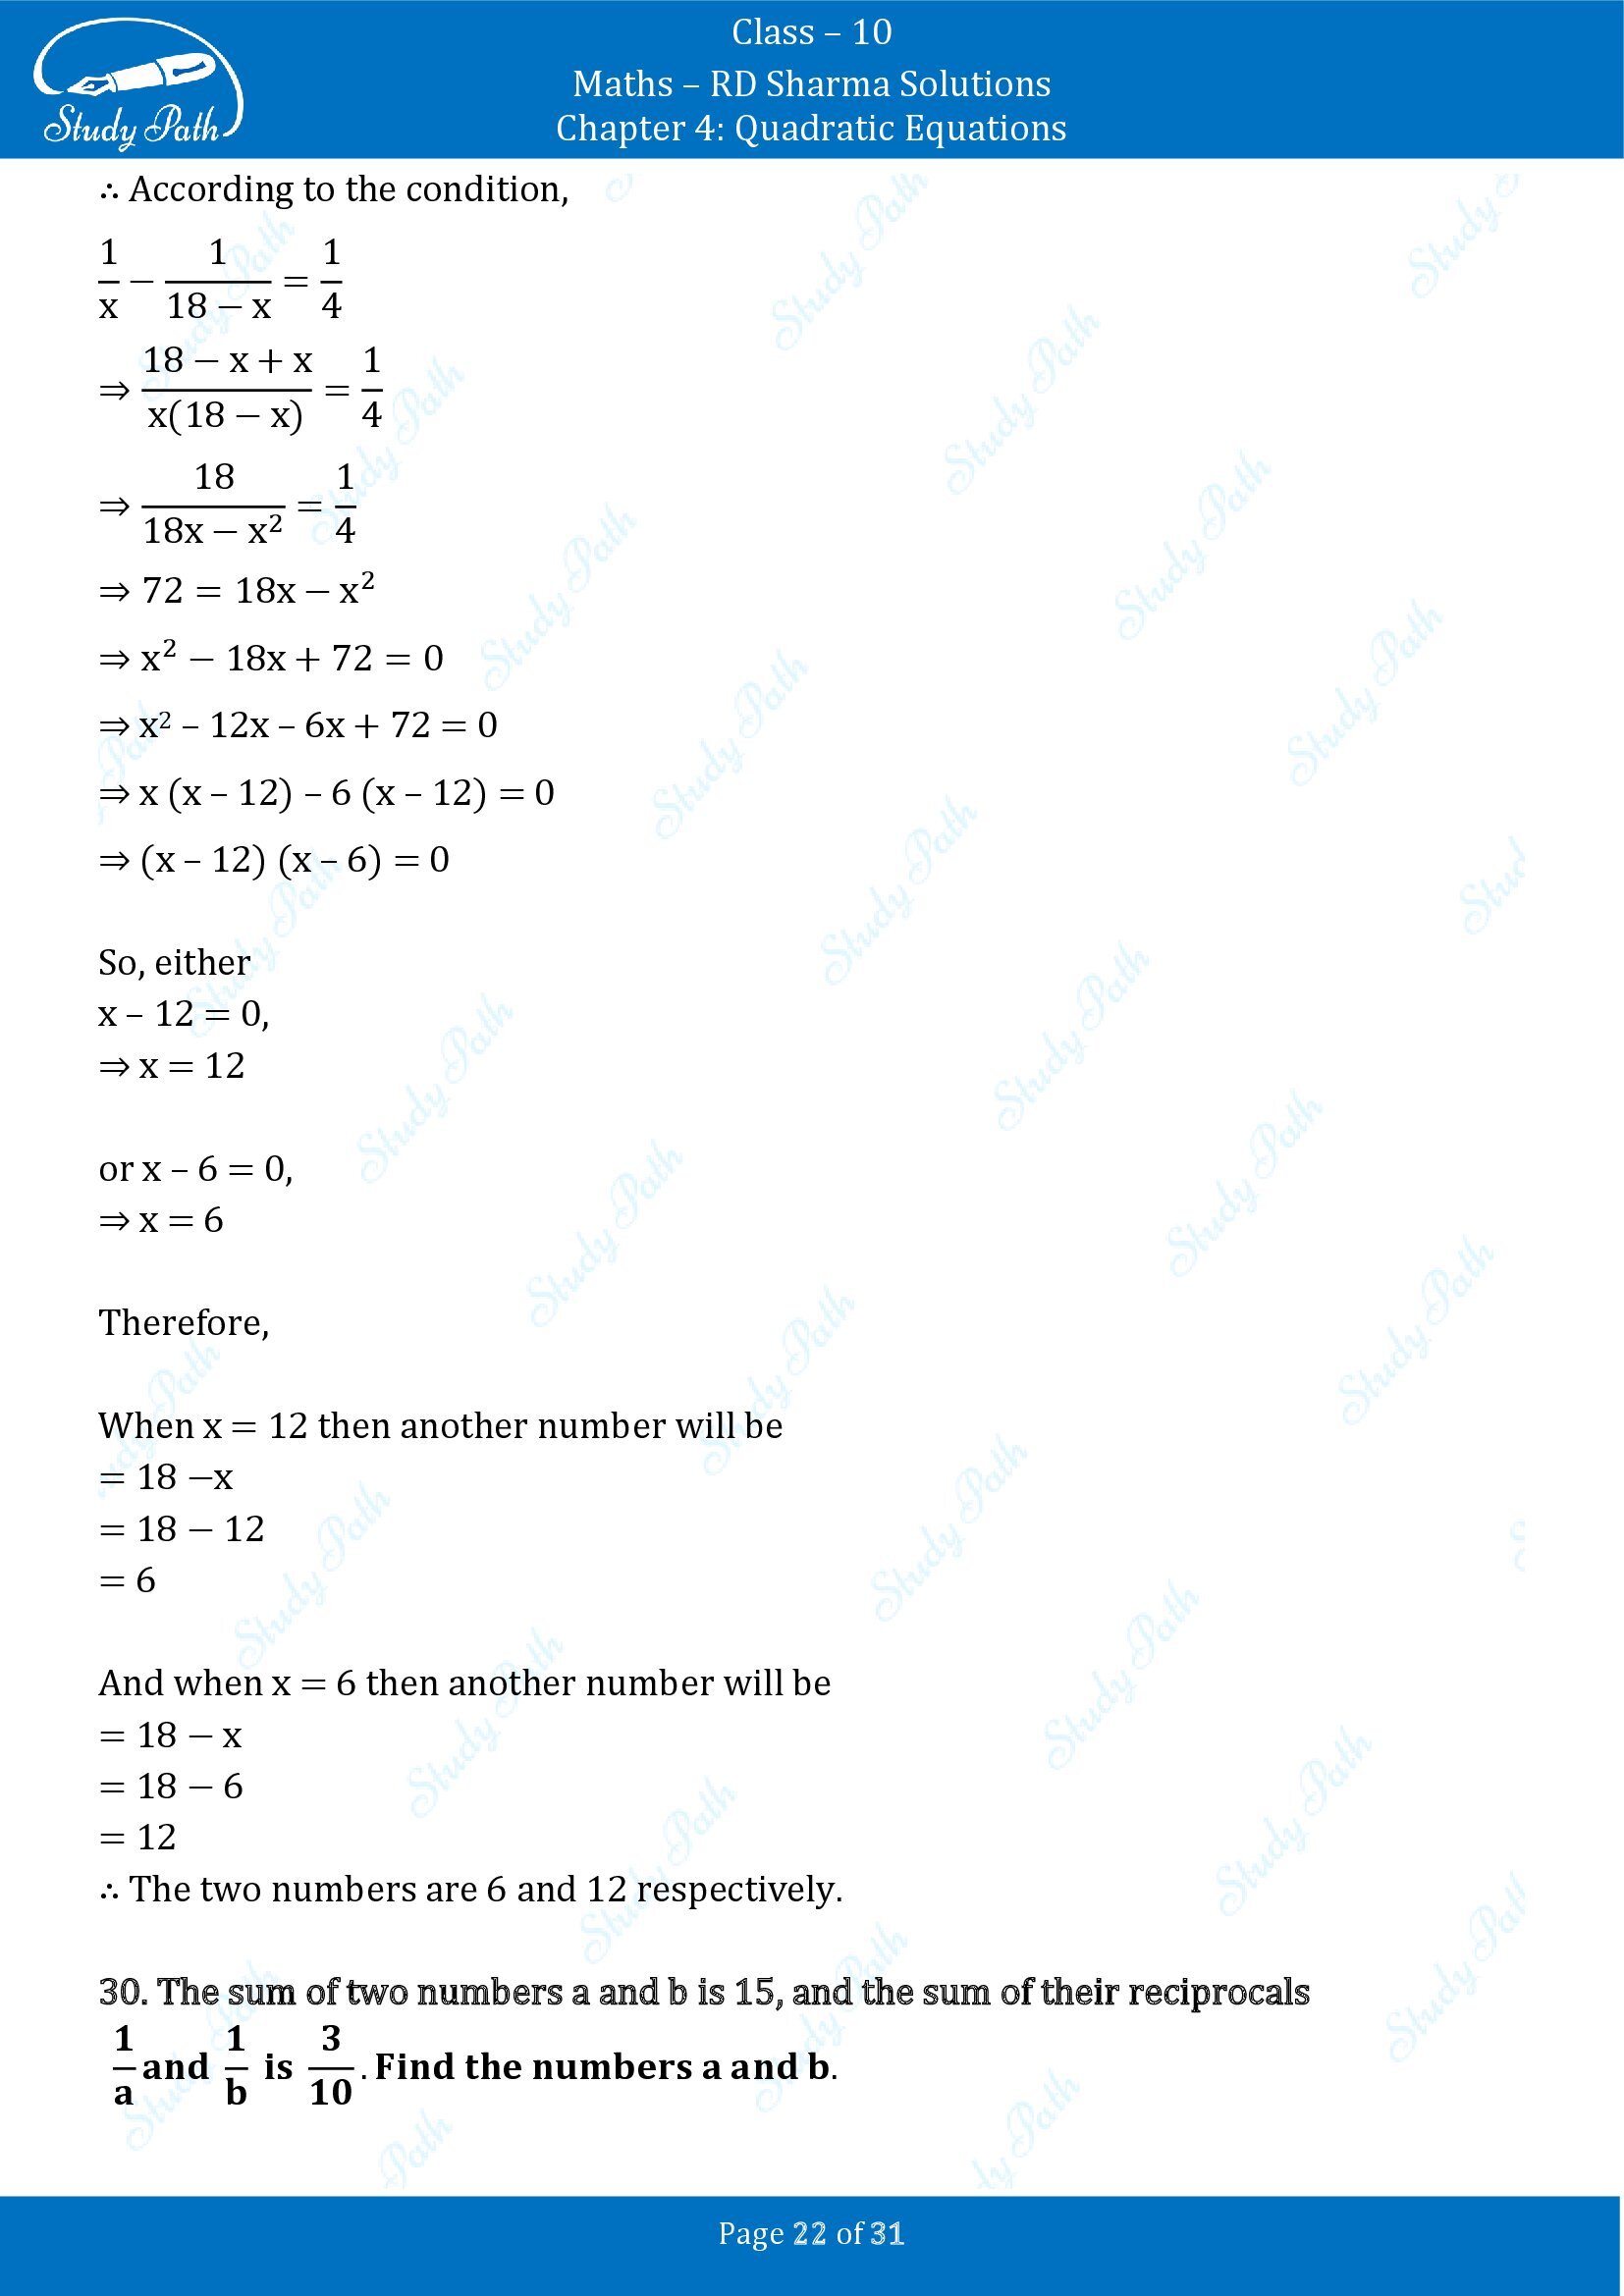 RD Sharma Solutions Class 10 Chapter 4 Quadratic Equations Exercise 4.7 00022